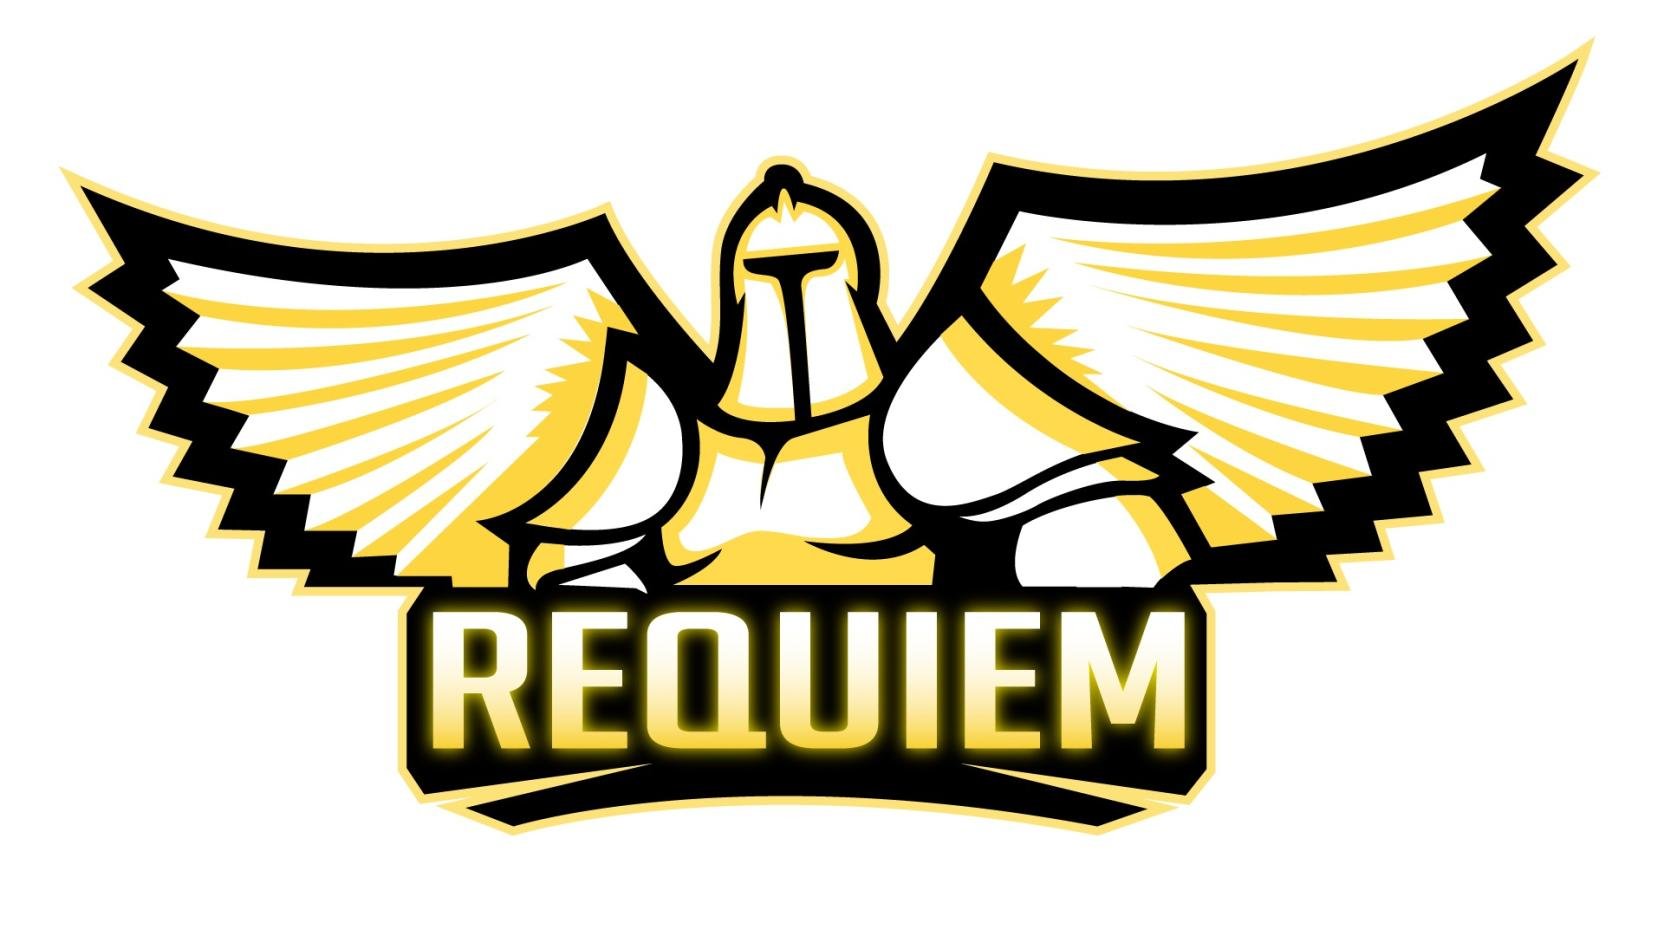 Fortnite Captain For-@RequiemGGs

Discord-https://t.co/VCRWC0Rf1A

Mixer-The_Insult

Xbox-vE VooPoo